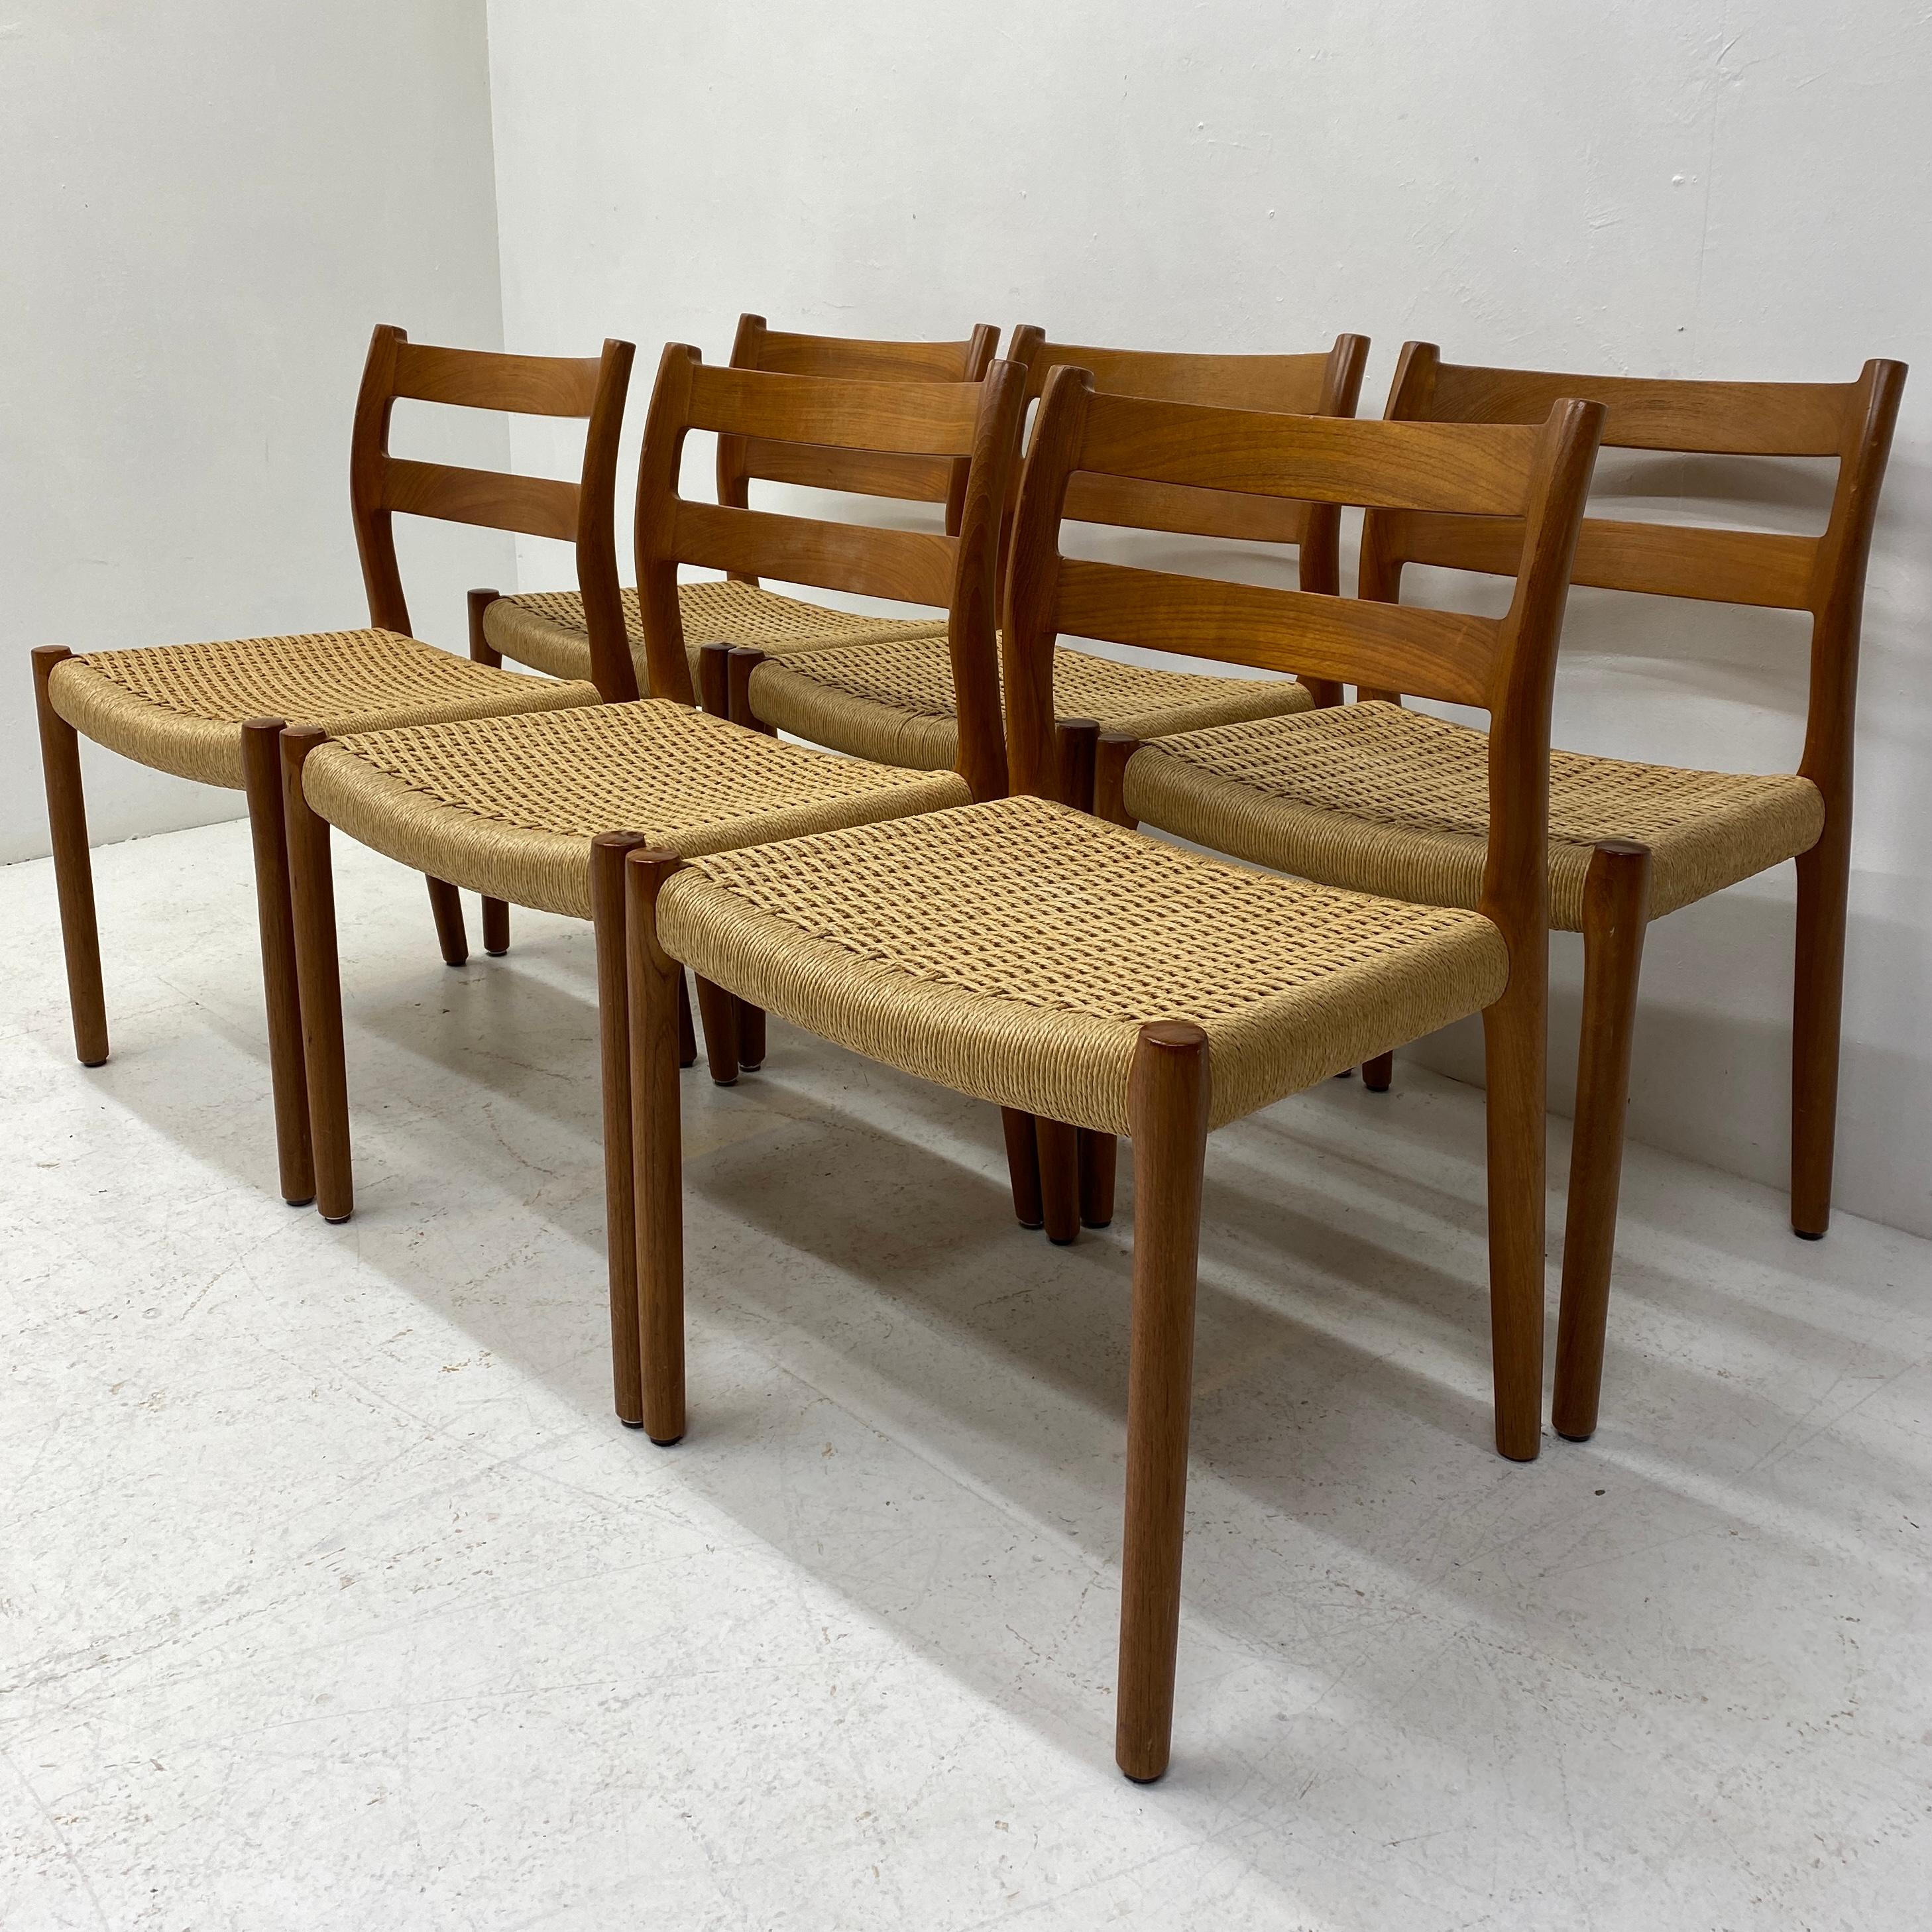 A stunning set of six Danish Niels Moller dining chairs circa 60s. The set features the rare model 84 that features organic & sculptural Danish design with solid teak frame, backrest & legs & papercord seats. The dining chairs are in beautiful